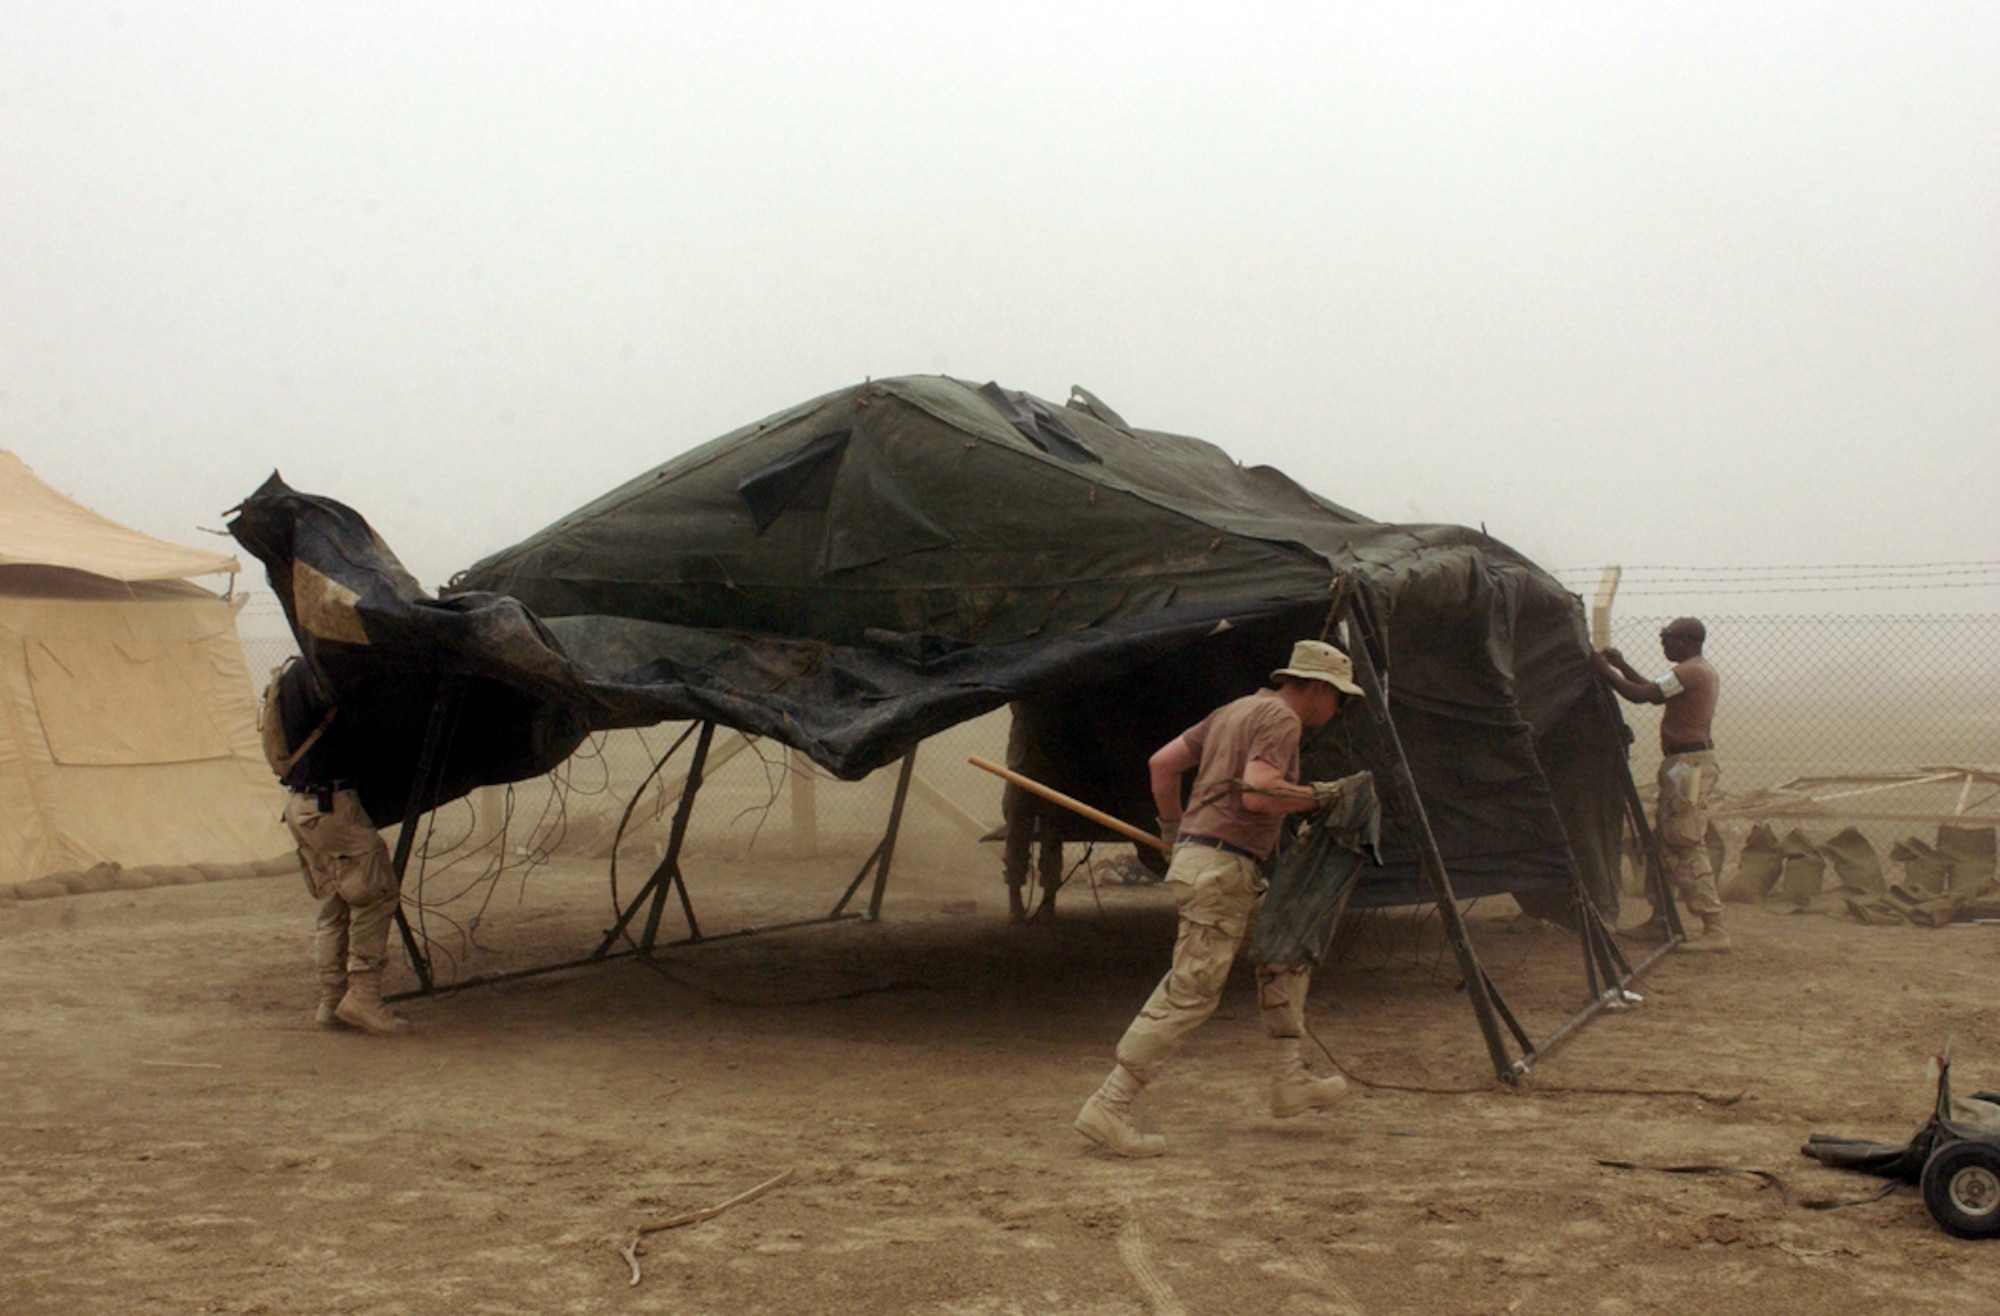 OPERATION IRAQI FREEDOM - Airmen from the 5th Combat Communications Group pitch in to set up a tent during a sandstorm at Tallil Air Base in southern Iraq on April 16.  The 5th CCG deployed from Robins Air Force Base, Ga., to Tallil recently.  (U.S. Air Force photo by Master Sgt. Terry L. Blevins)